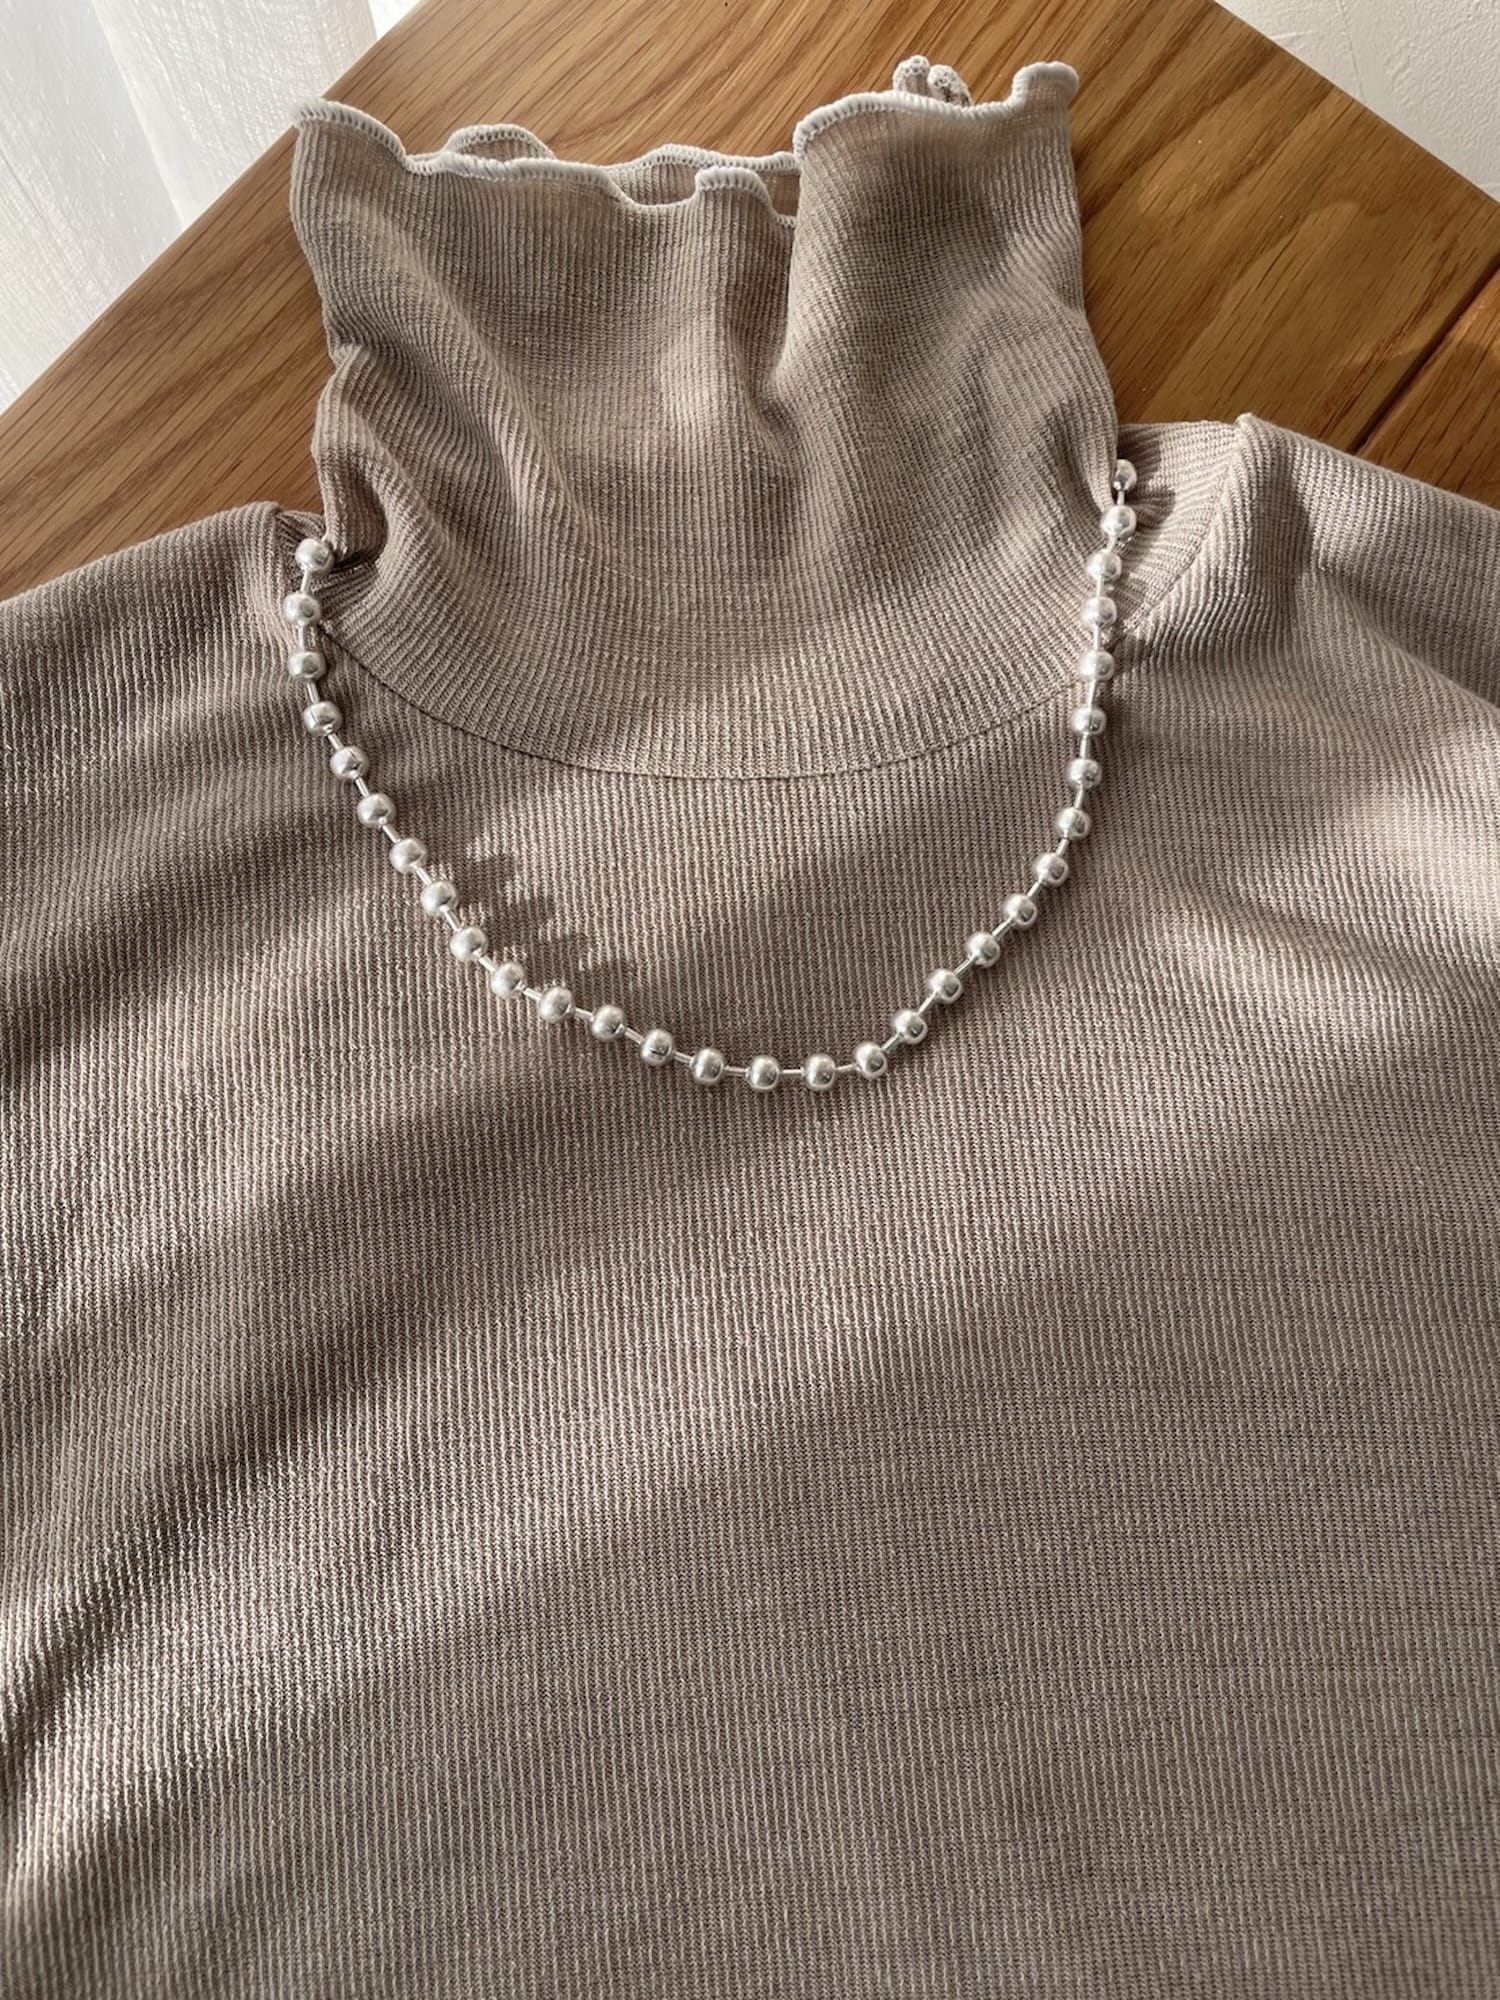 ball necklace